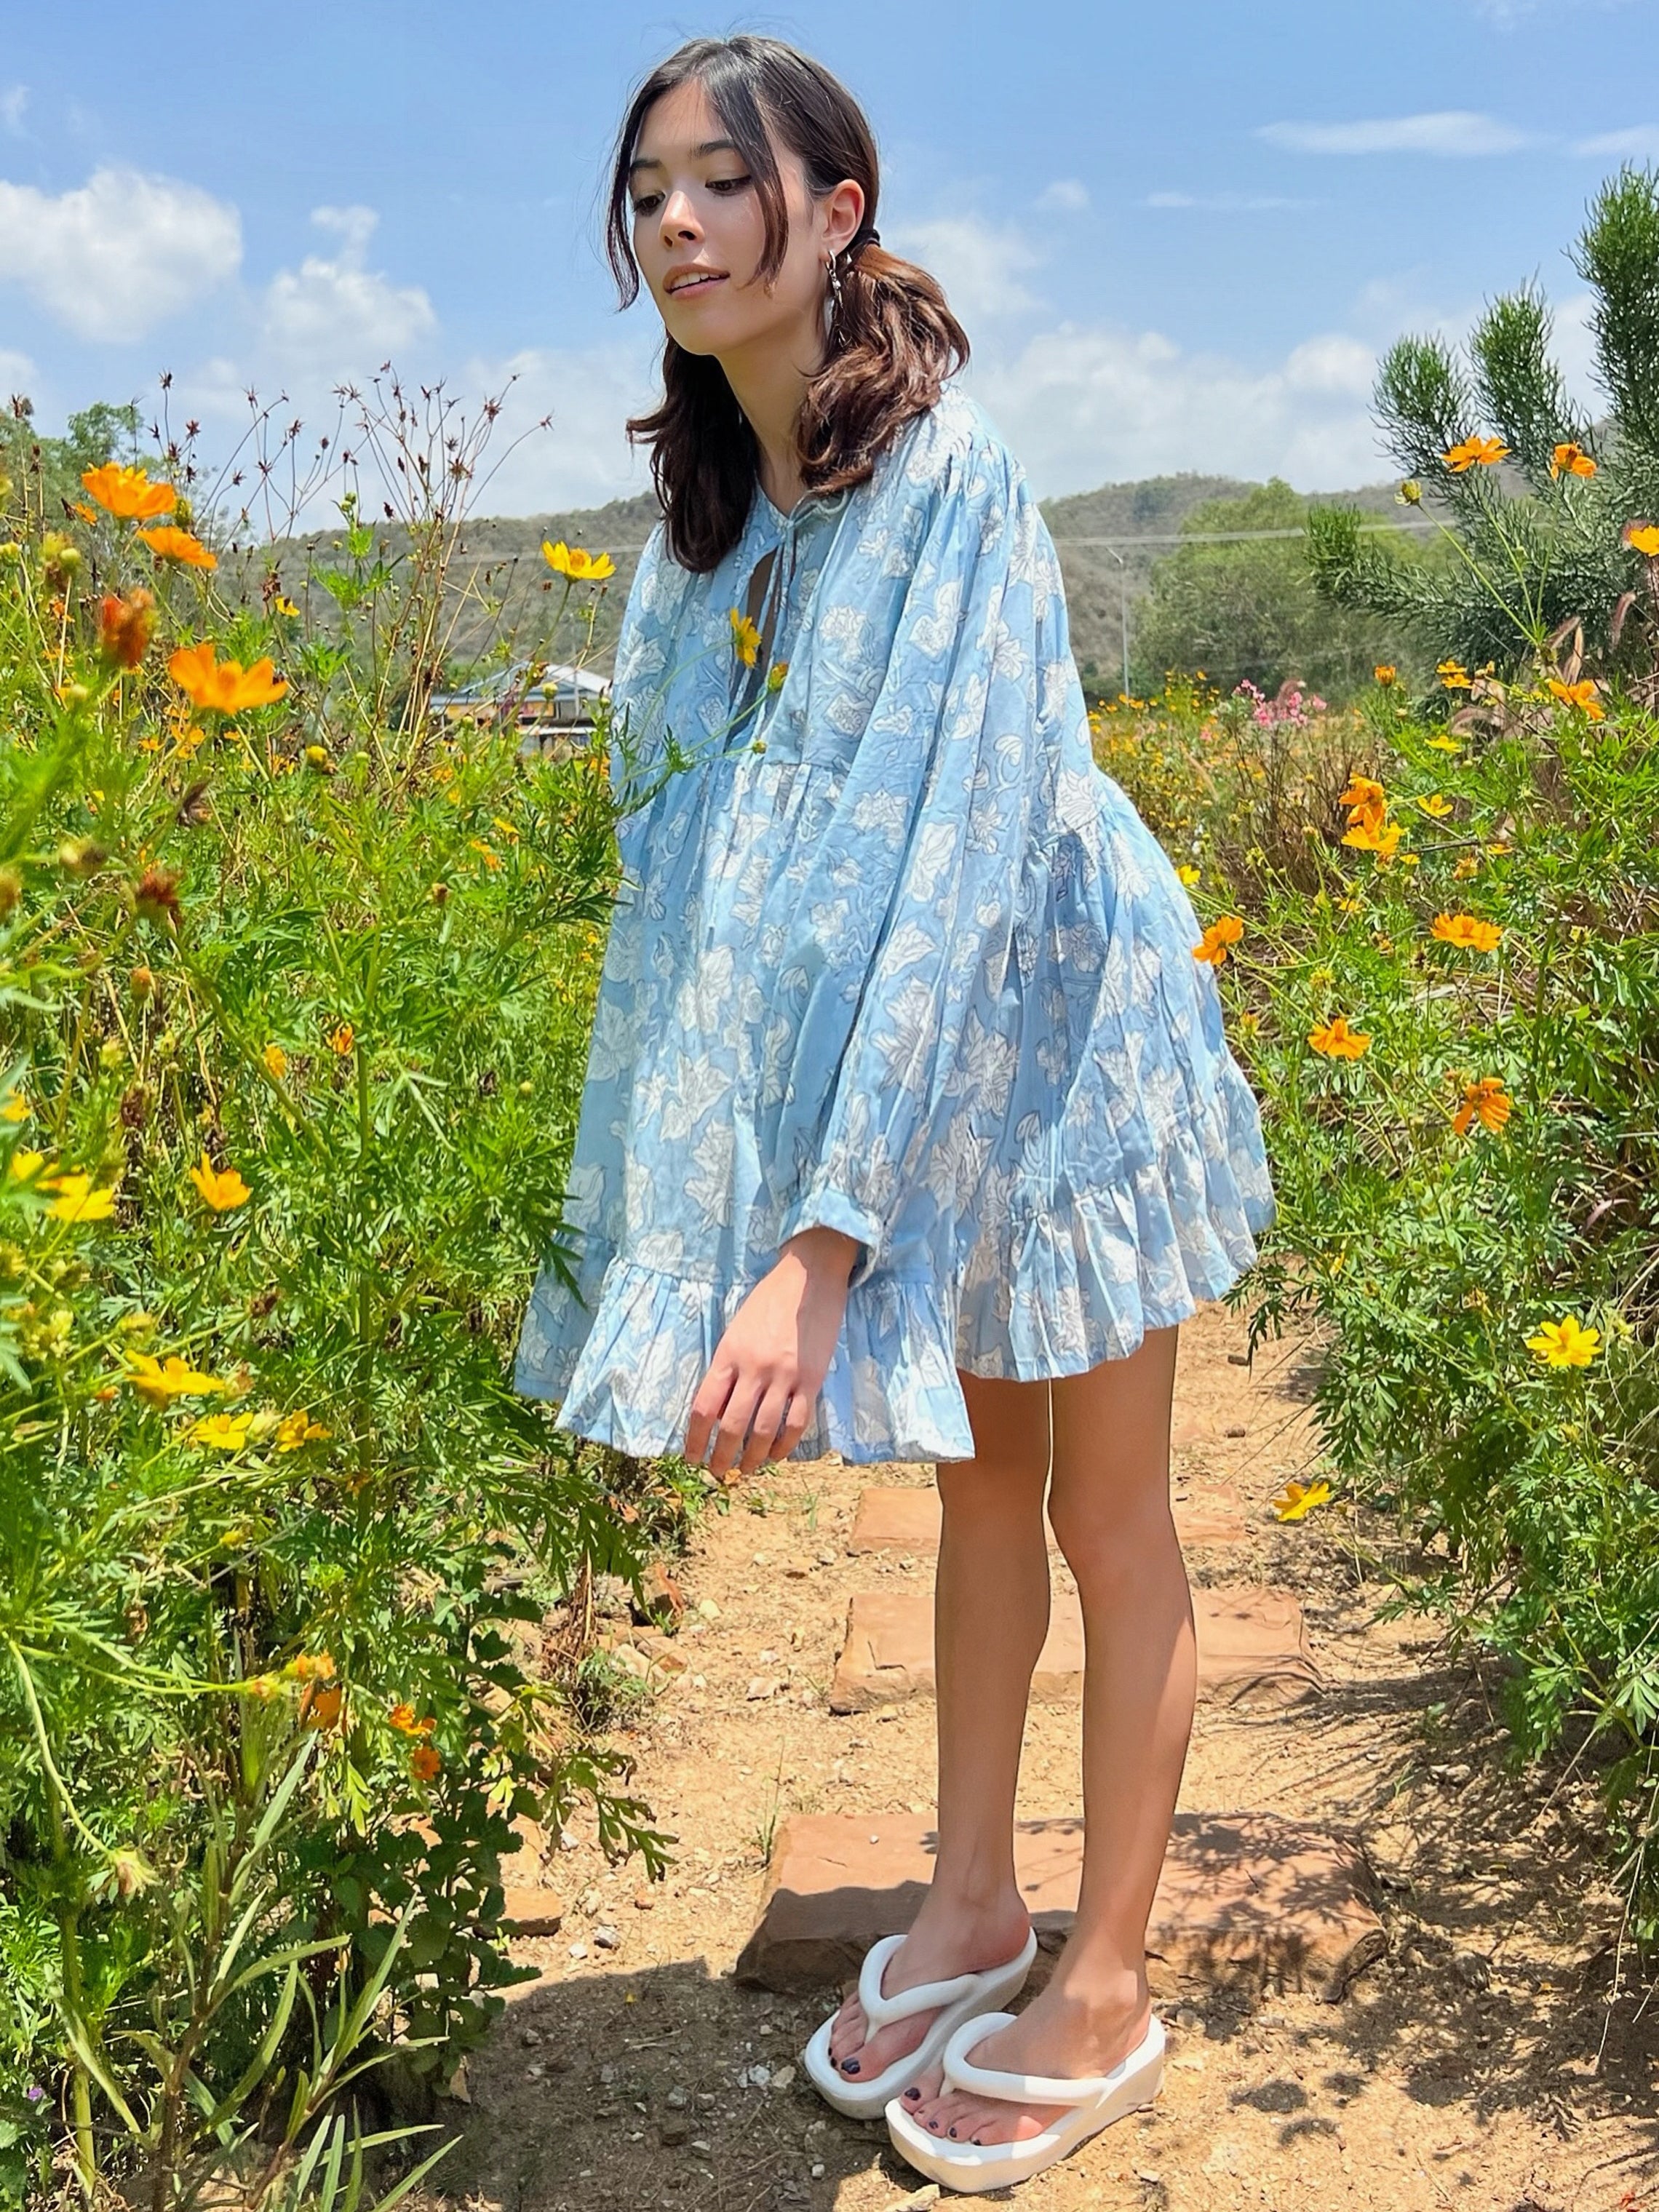 Shop Coco de Chom Lola Bohemian Mini Dress in Beautiful Blue Sky - A Truly Unique Limited Edition Piece. Handcrafted with Wooden Blocks on Fine Cotton Voile, Showcasing a Dreamy Block Printed Pattern Inspired by Bougainvillea Flowers and Vacations. Ideal for Beach Days, Vacations, and Boho Enthusiasts.